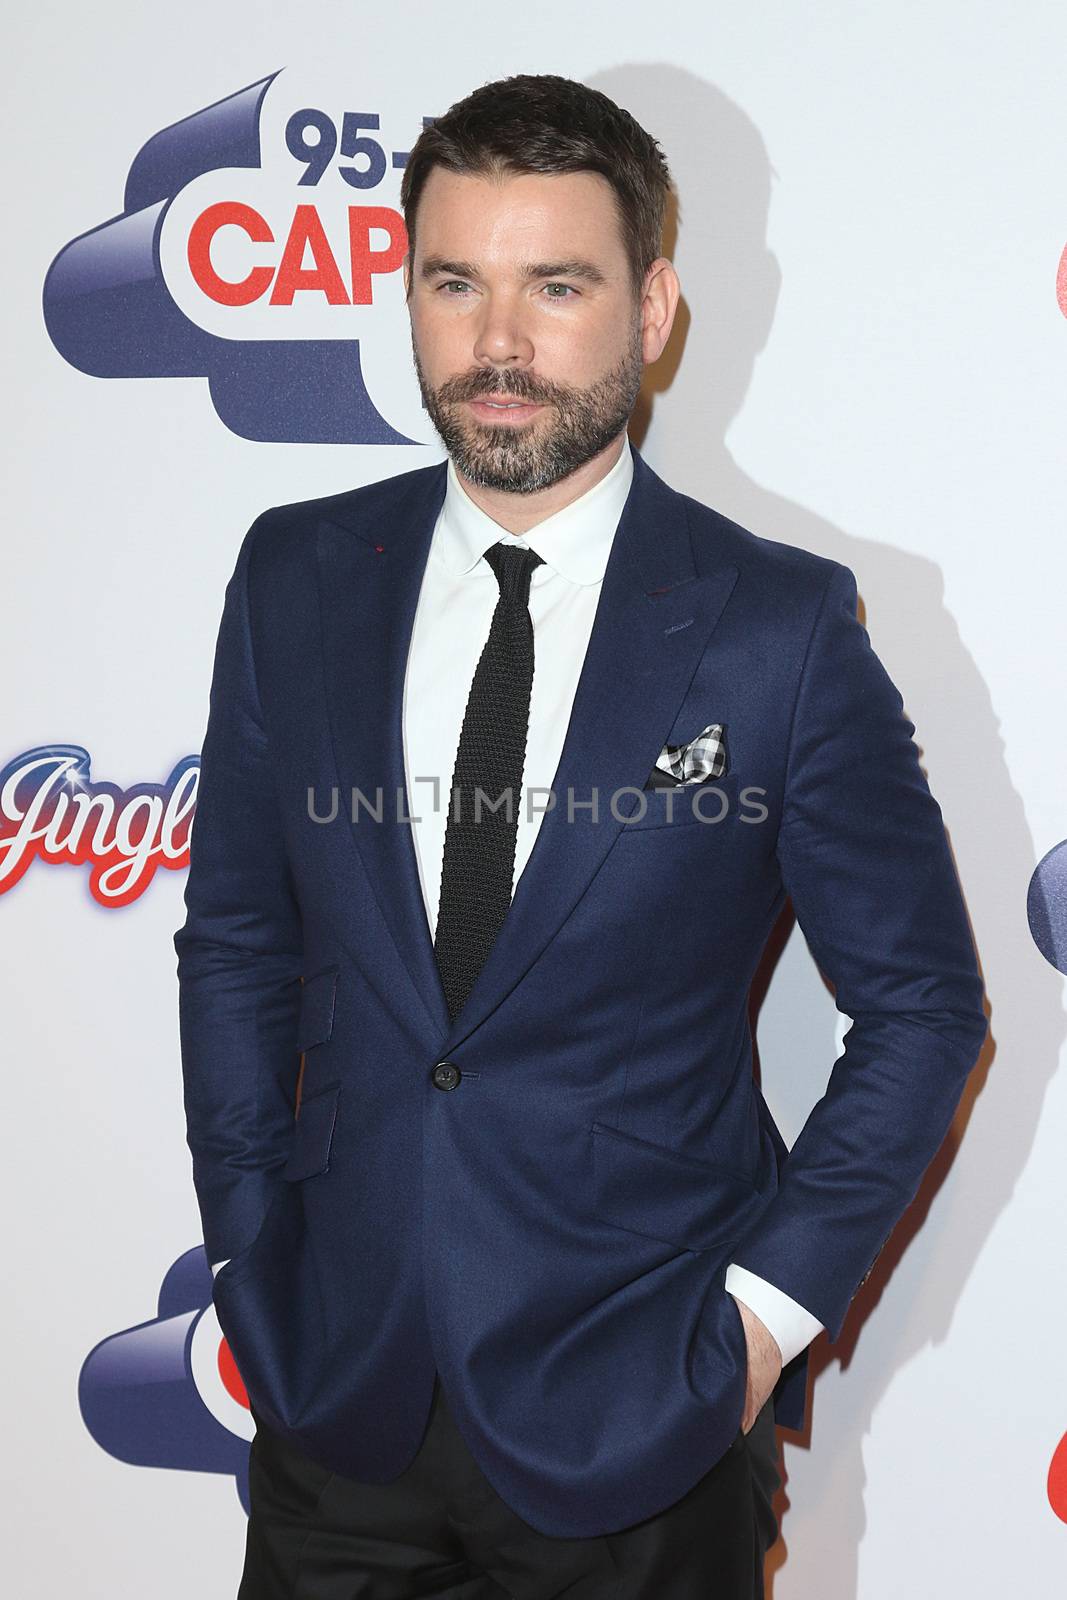 UNITED KINGDOM, London: Dave Berry attends the Capital FM Jingle Bell Ball at 02 Arena in London on December 6, 2015. 